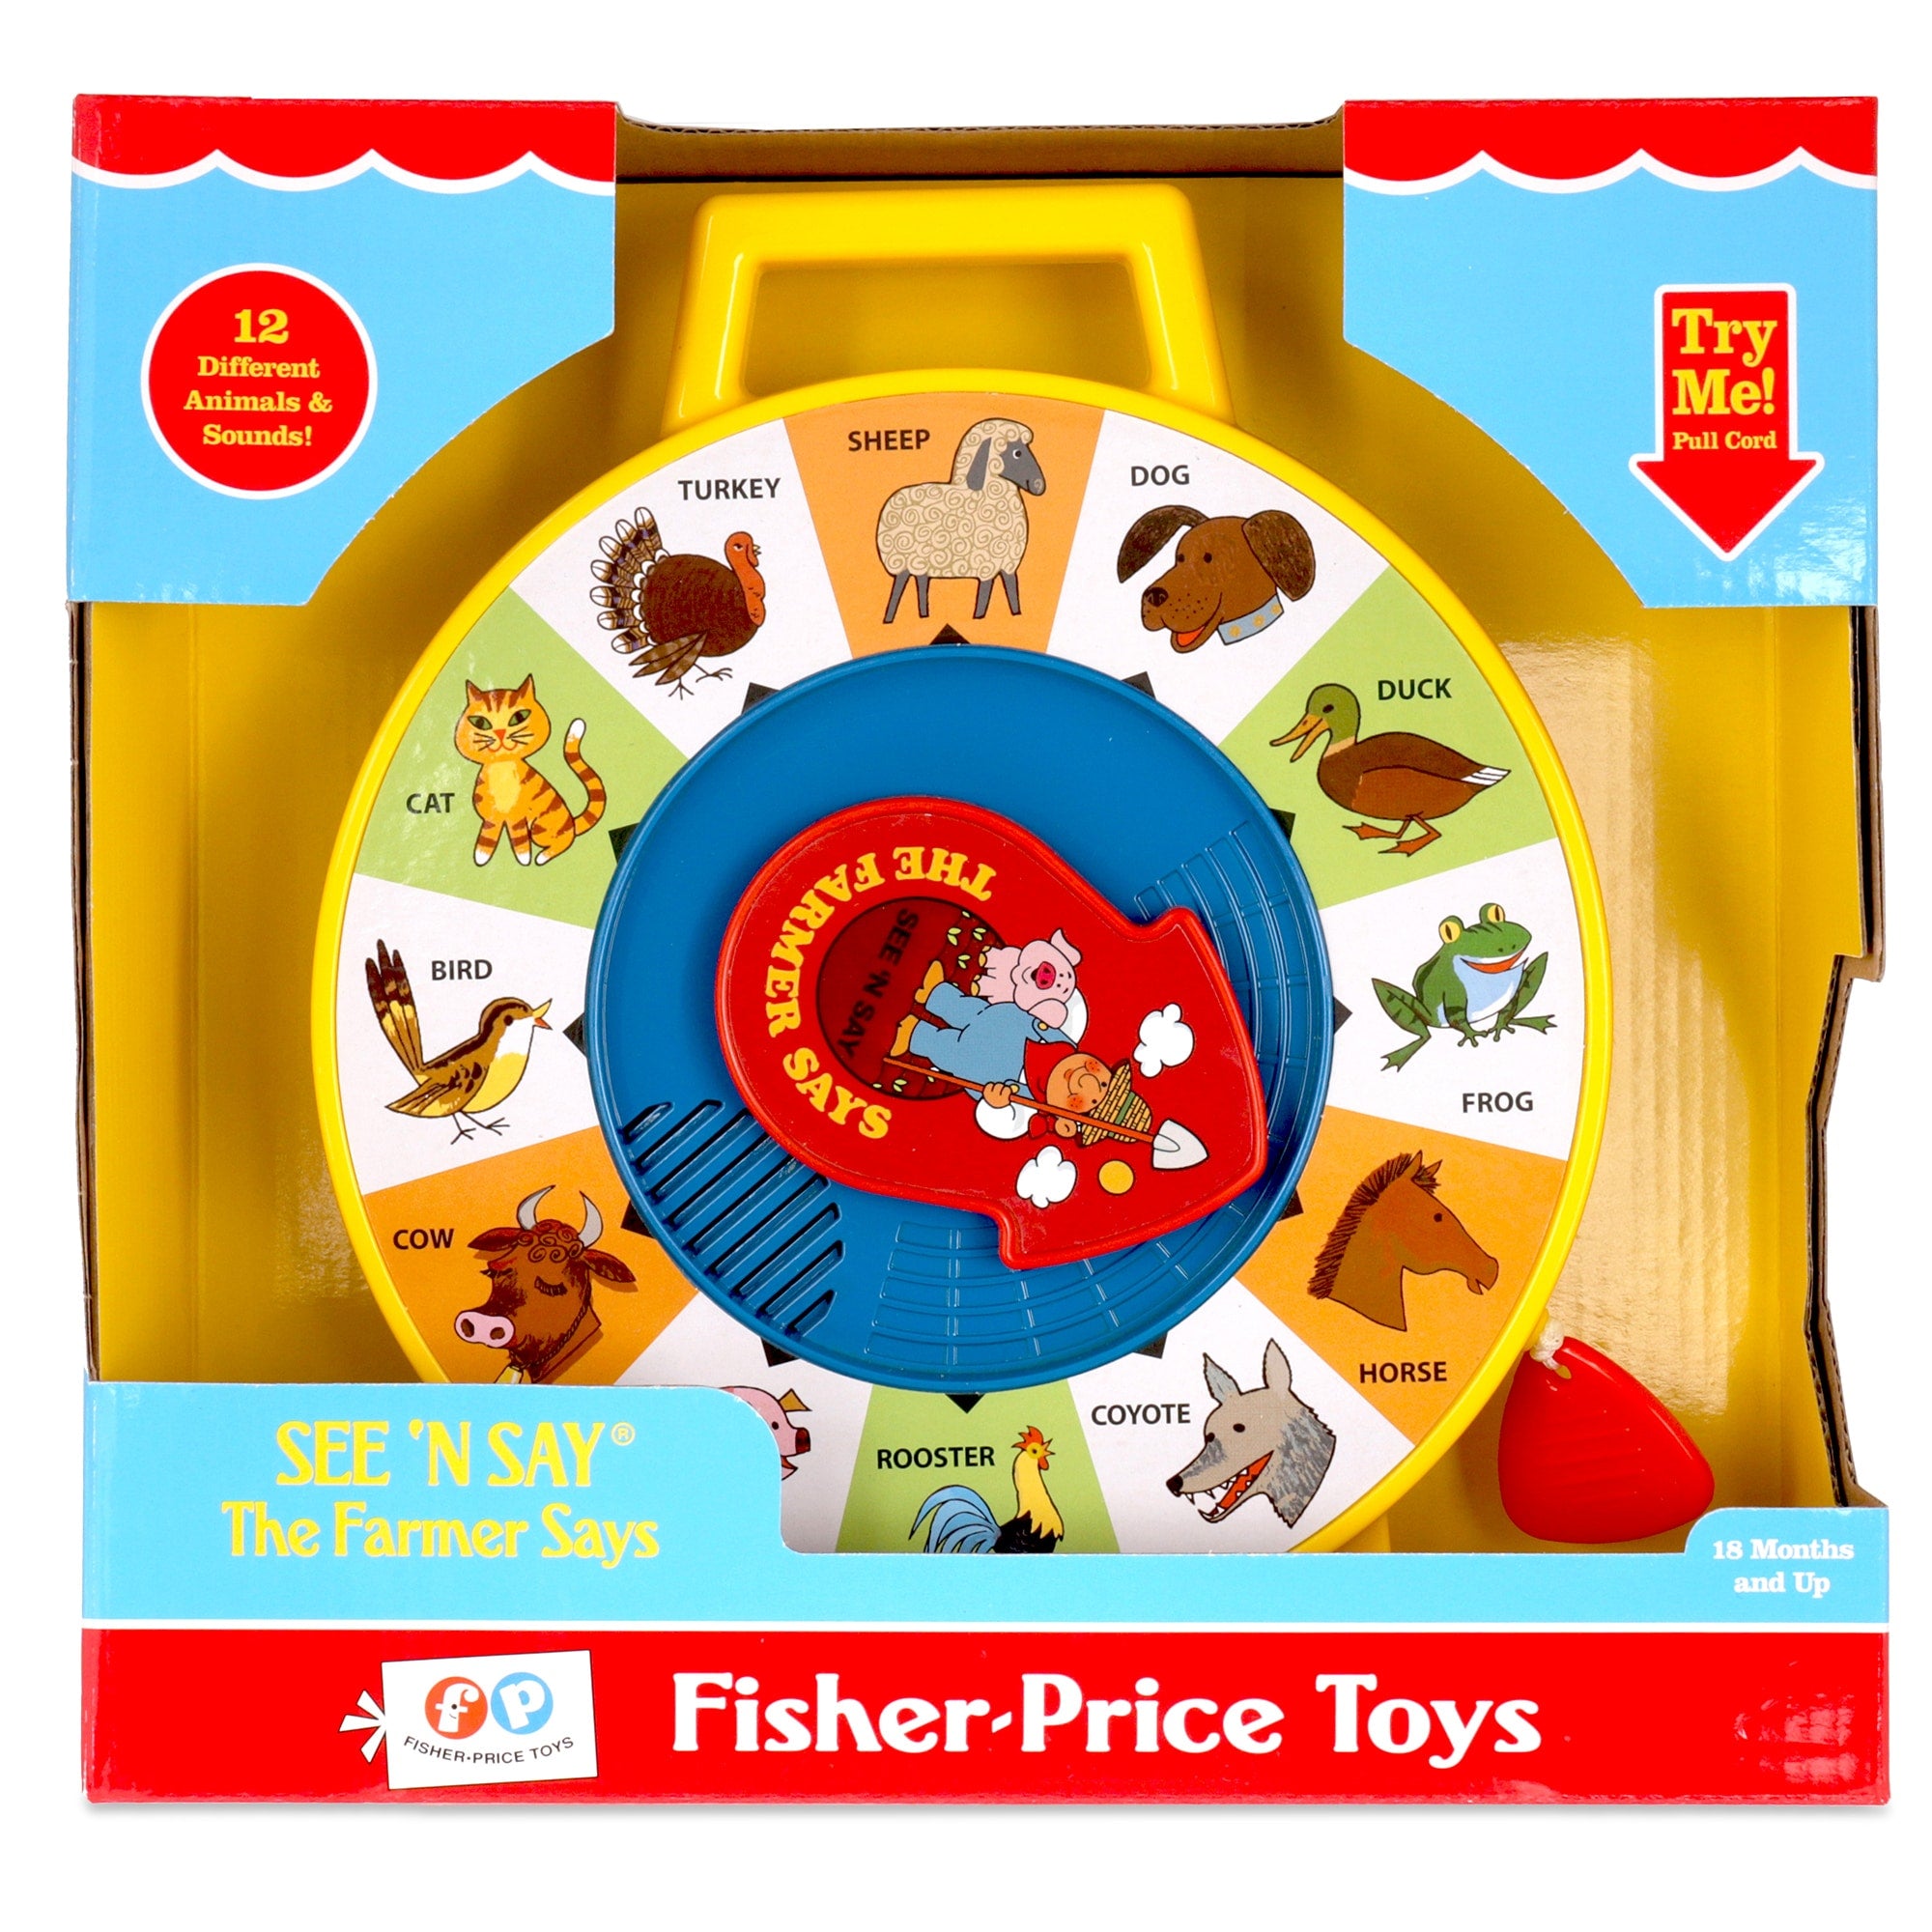 Fisher Price Chatter Phone – Treehouse Toys